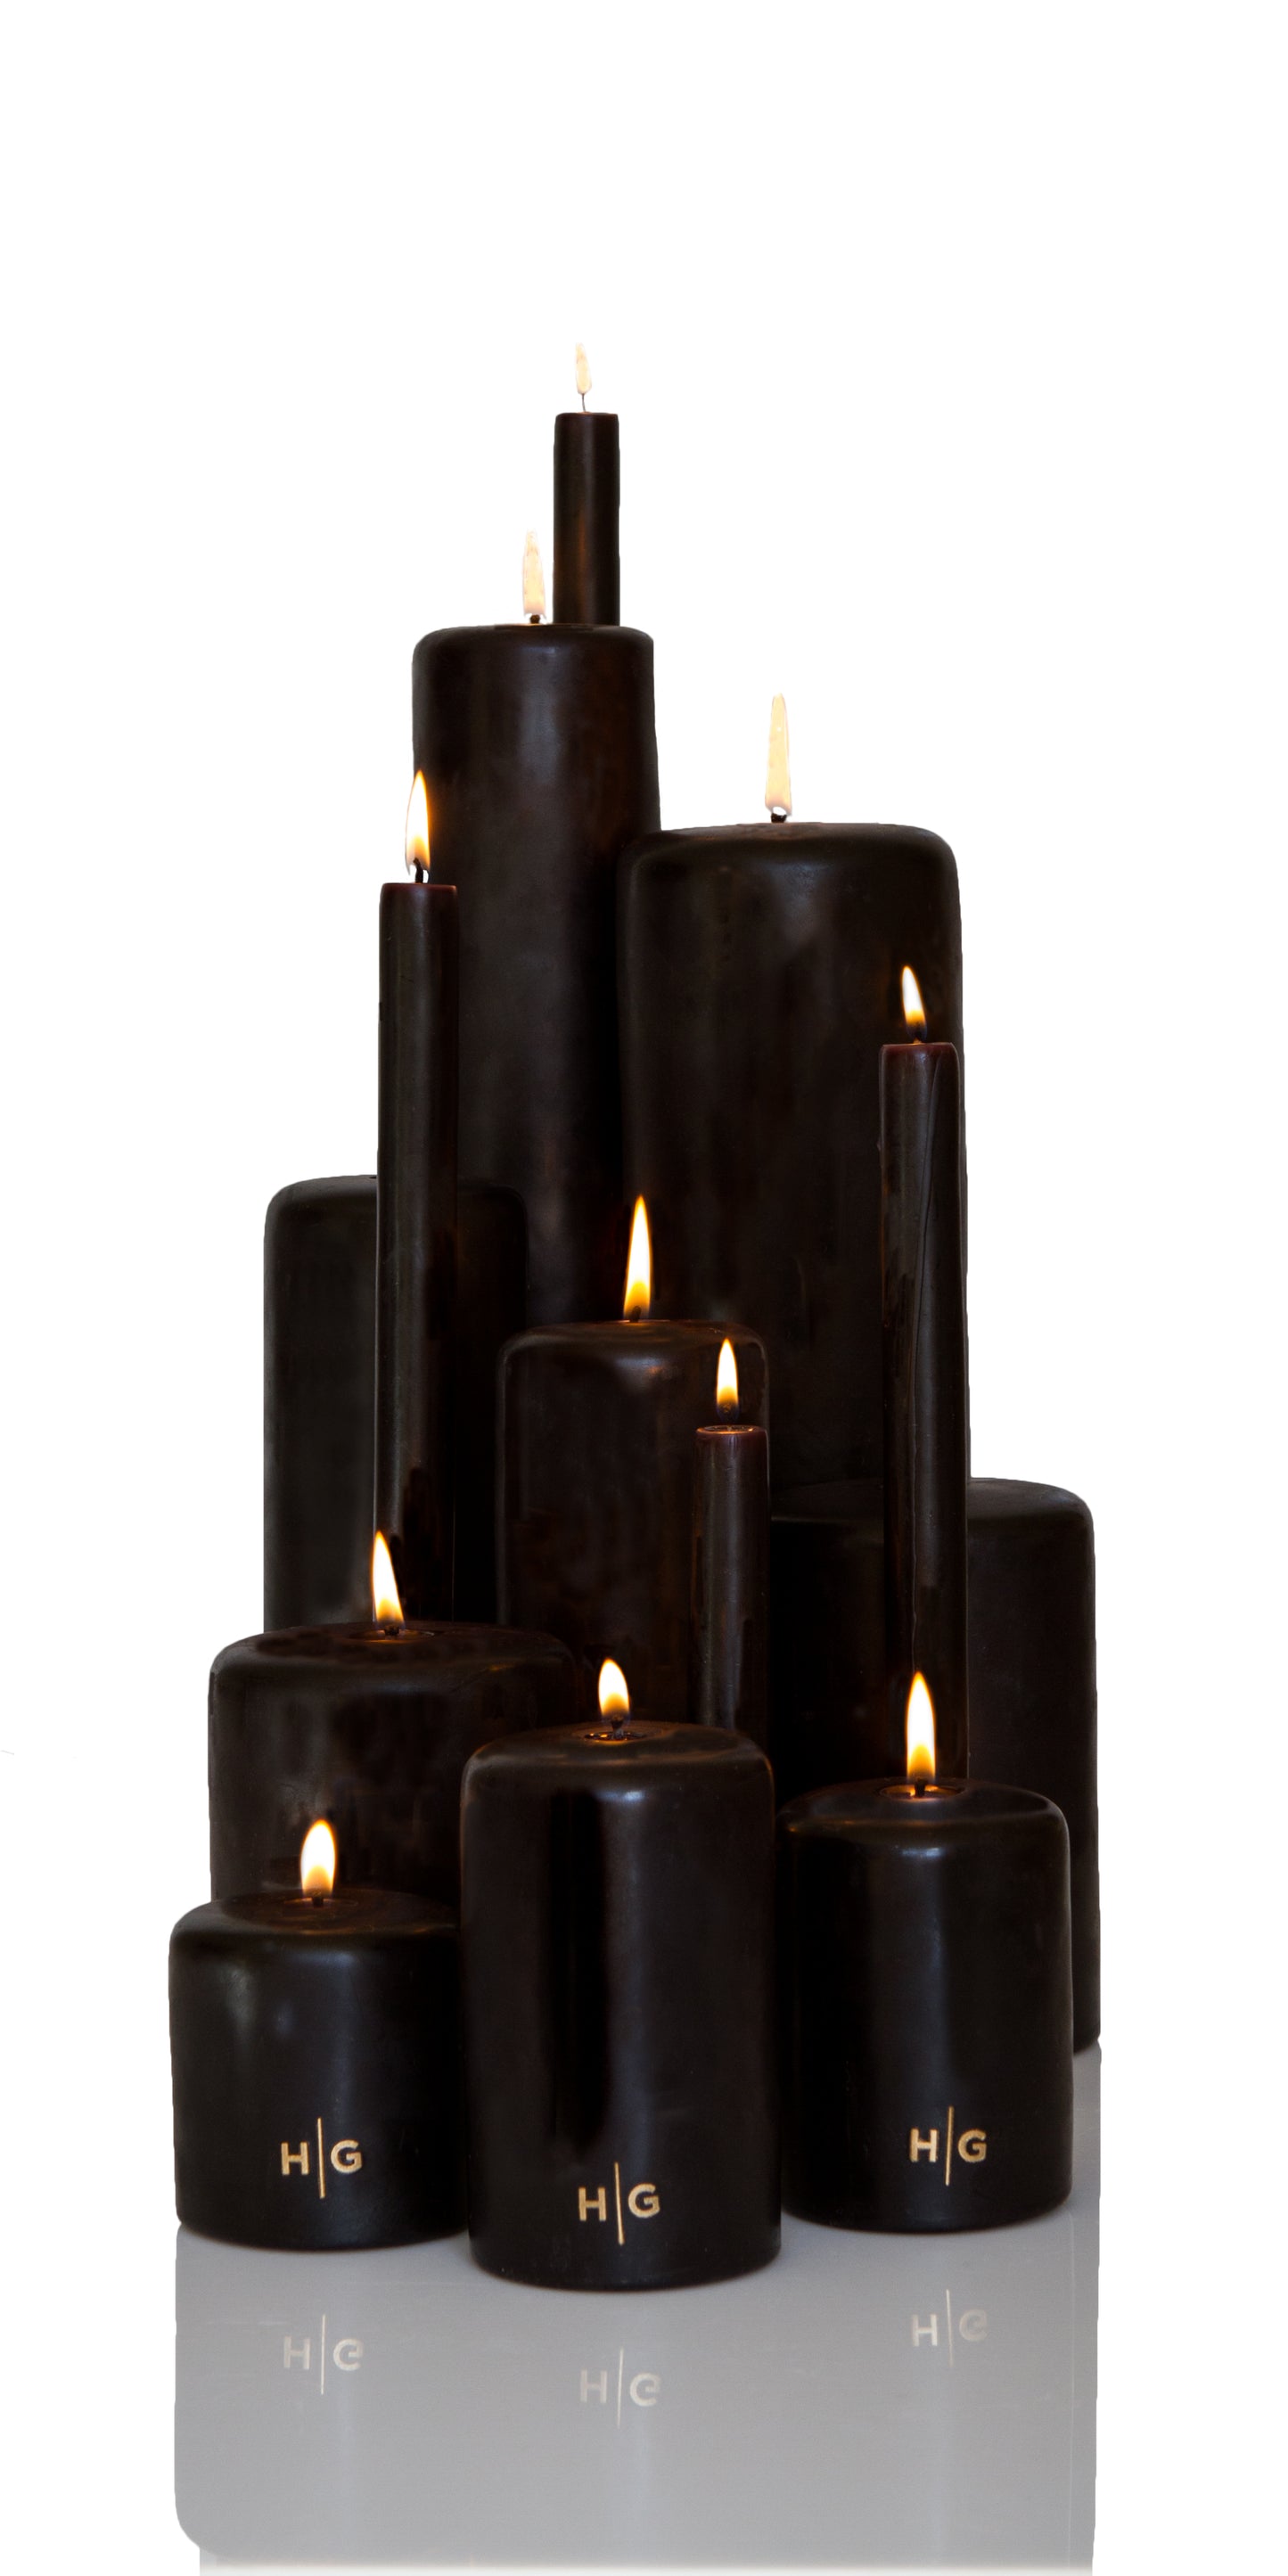 Gold and black candle